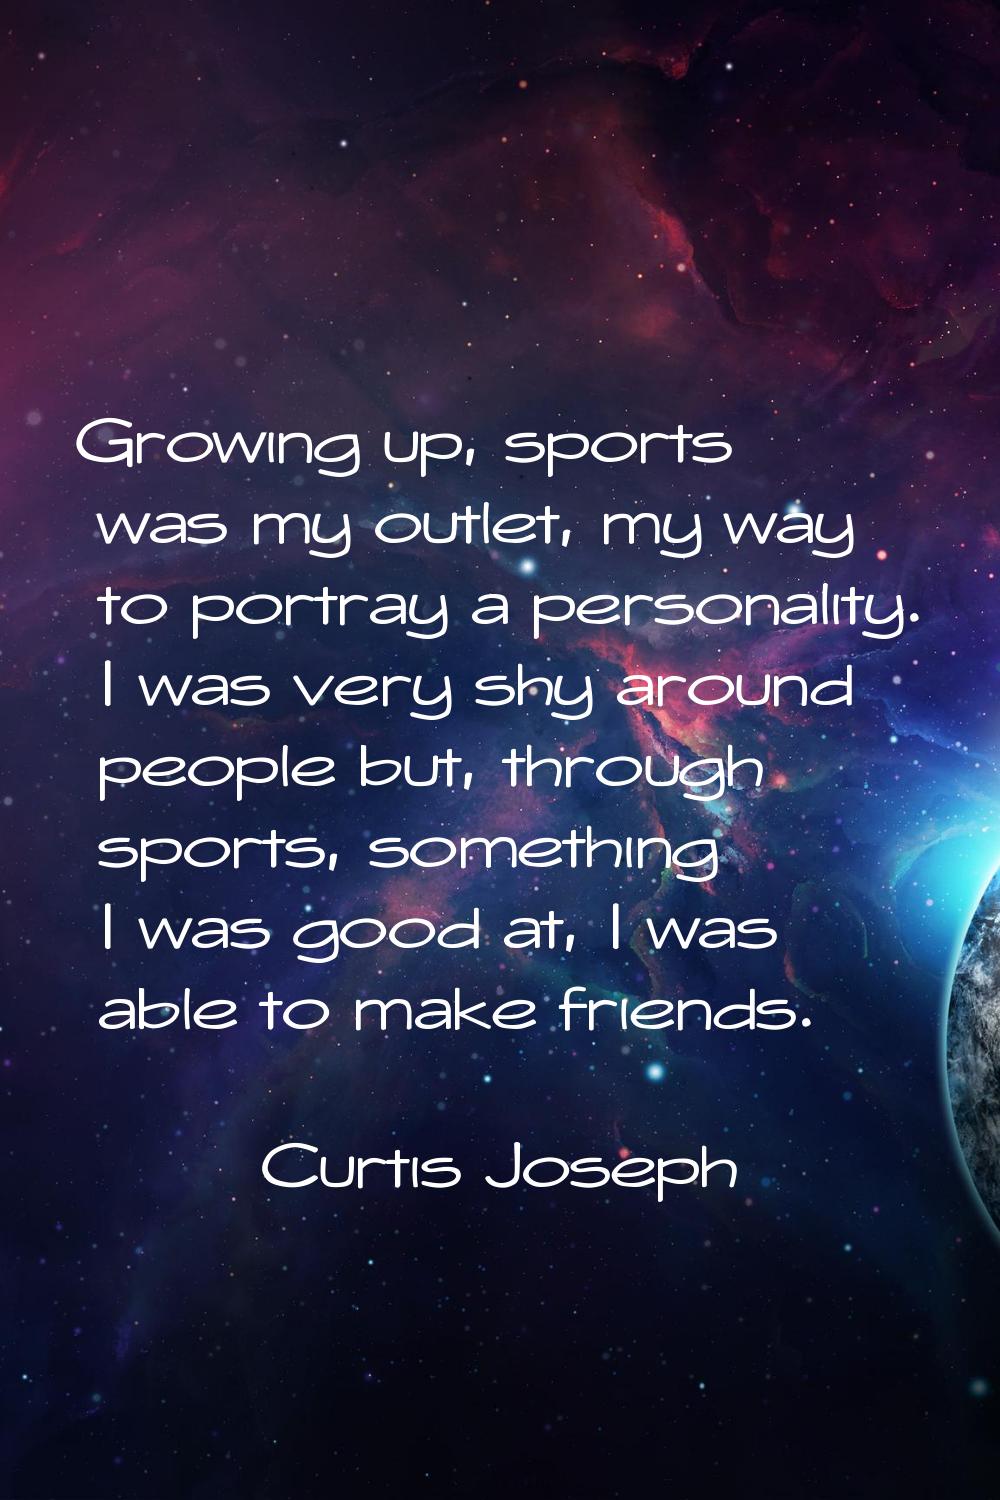 Growing up, sports was my outlet, my way to portray a personality. I was very shy around people but